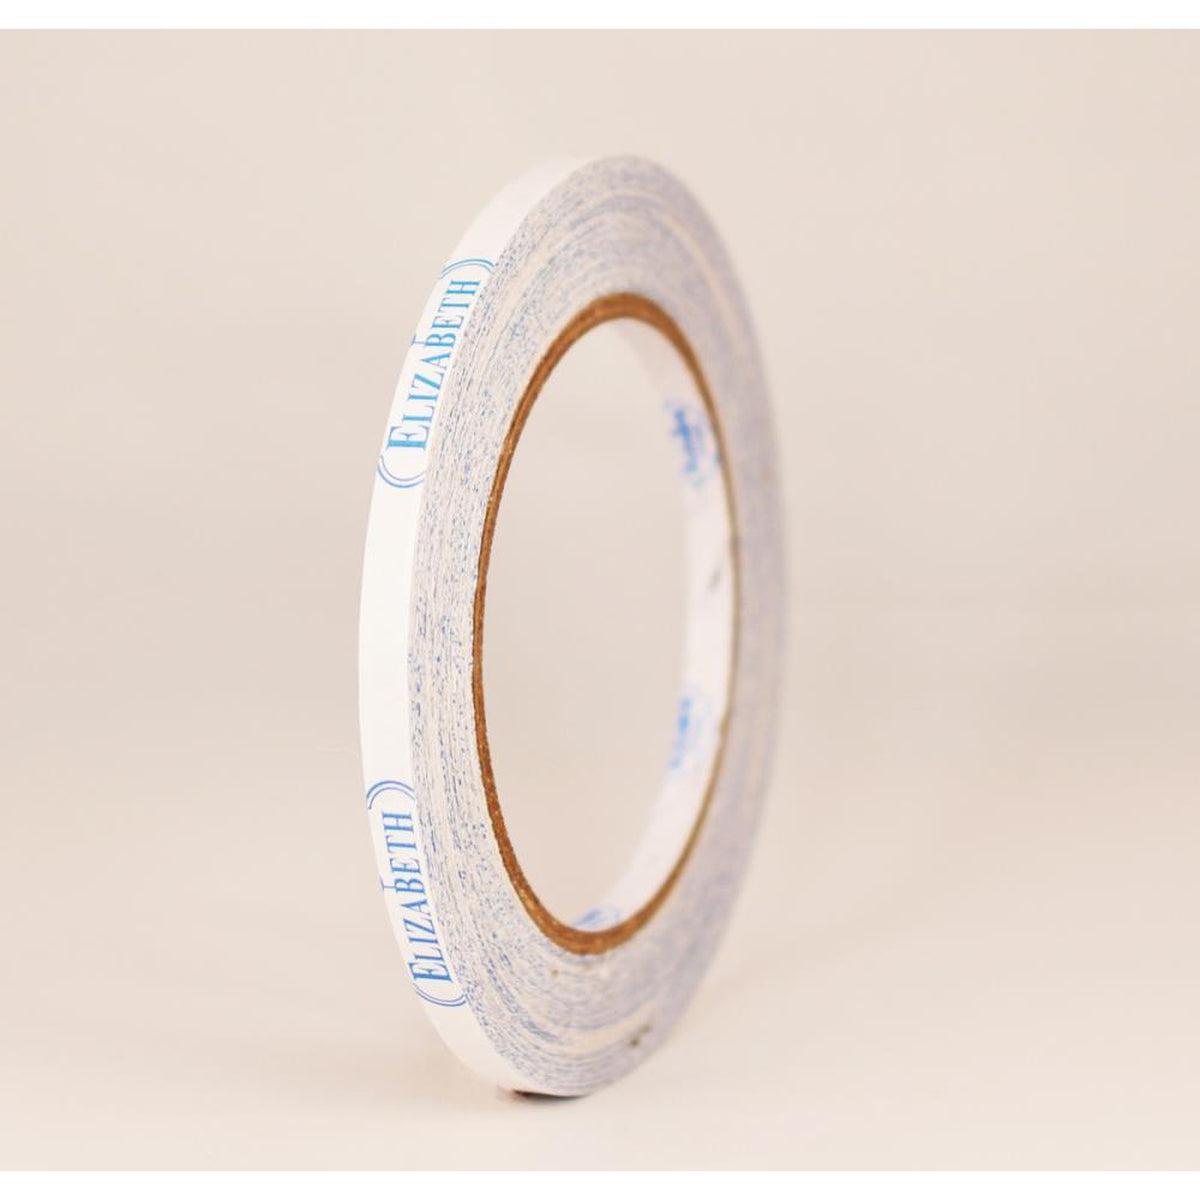 DOUBLE-SIDED CLEAR TAPE -NANO